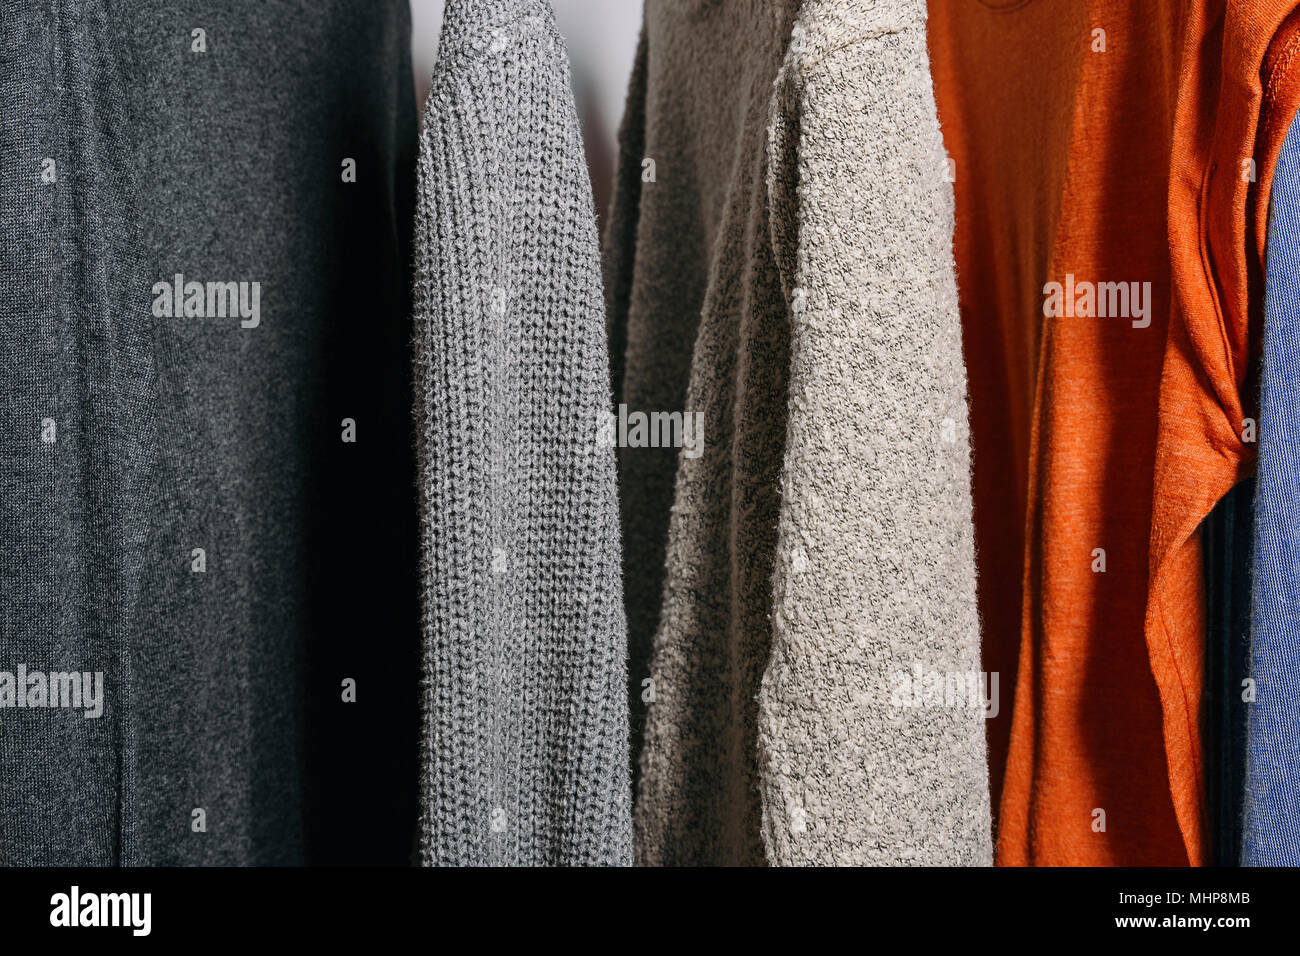 Close up shot of clothing hanging on a clothing rack in a shop or home closet. Stock Photo